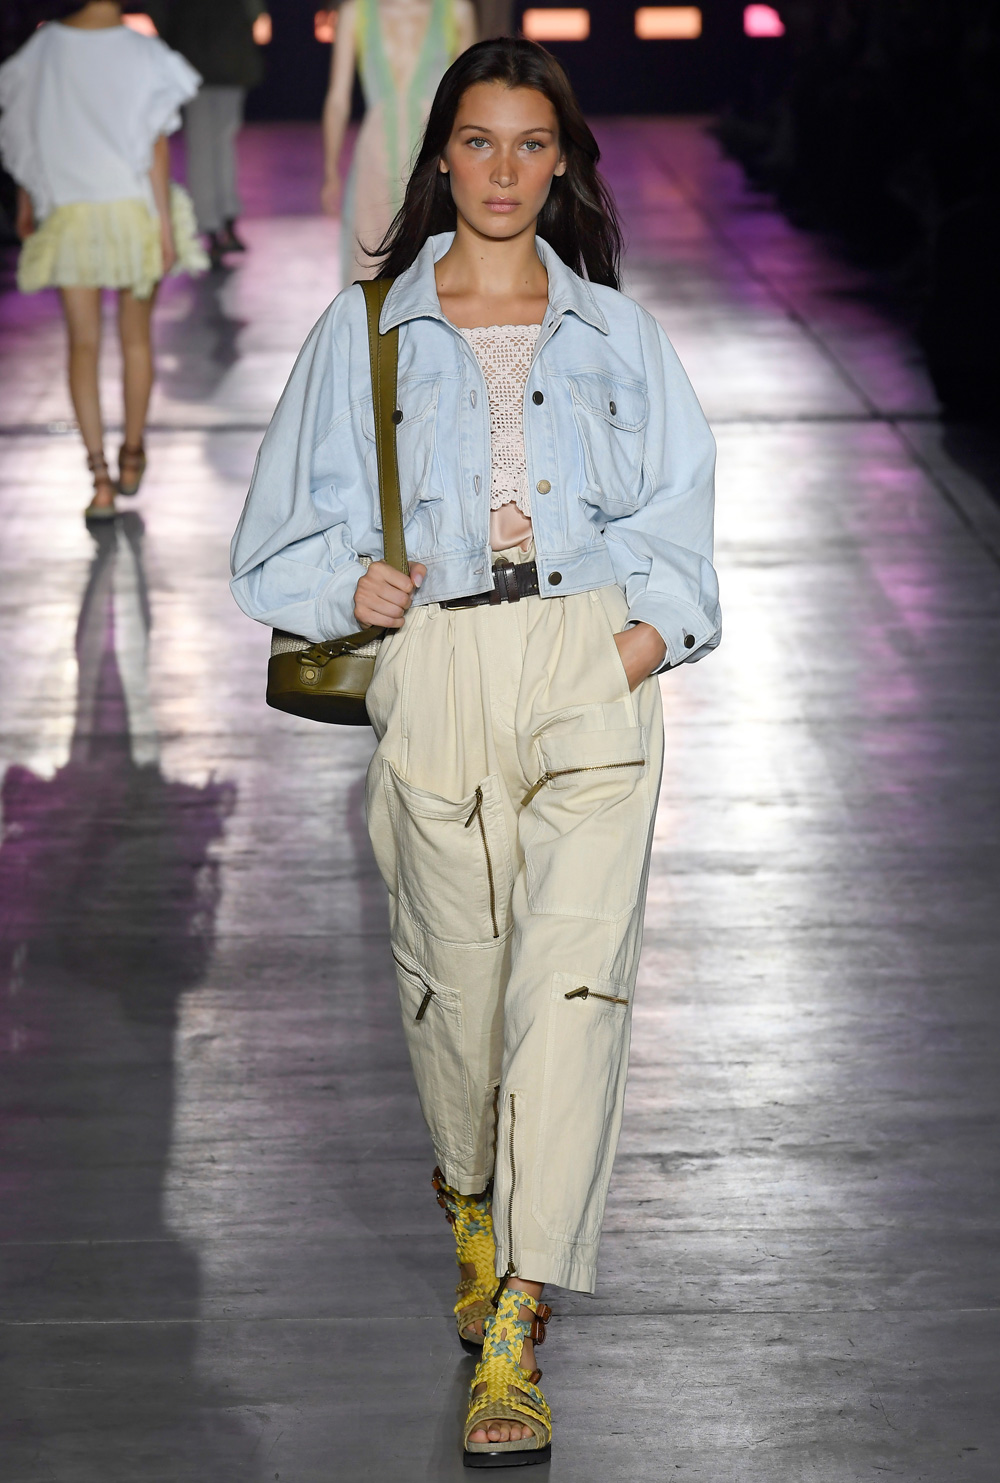 Milan Fashion Week Spring/Summer 2019: The Best Runway Looks | About Her